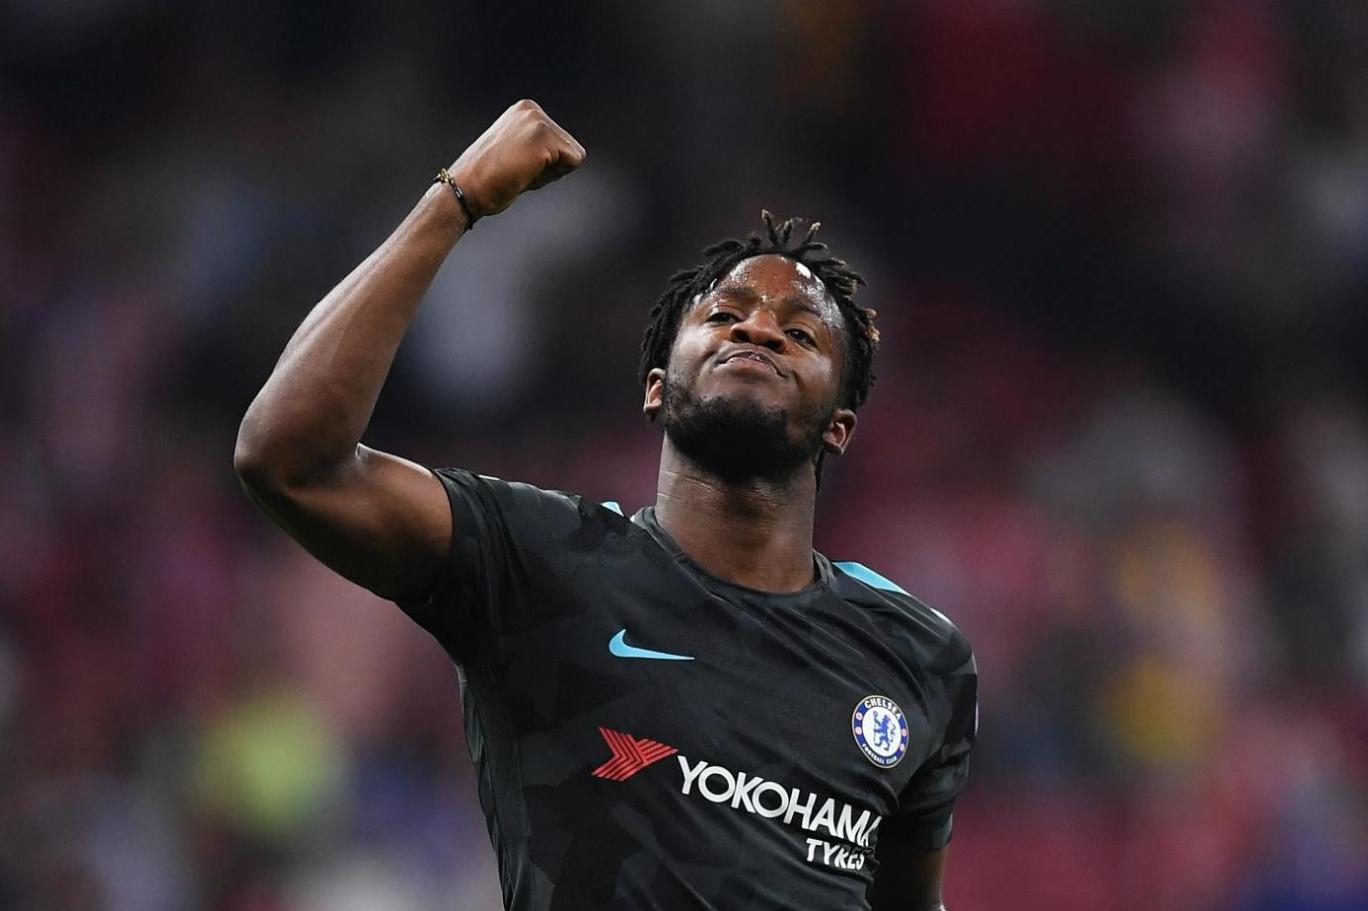 Michy Batshuayi celebrates after scoring for Chelsea. (Getty Images)